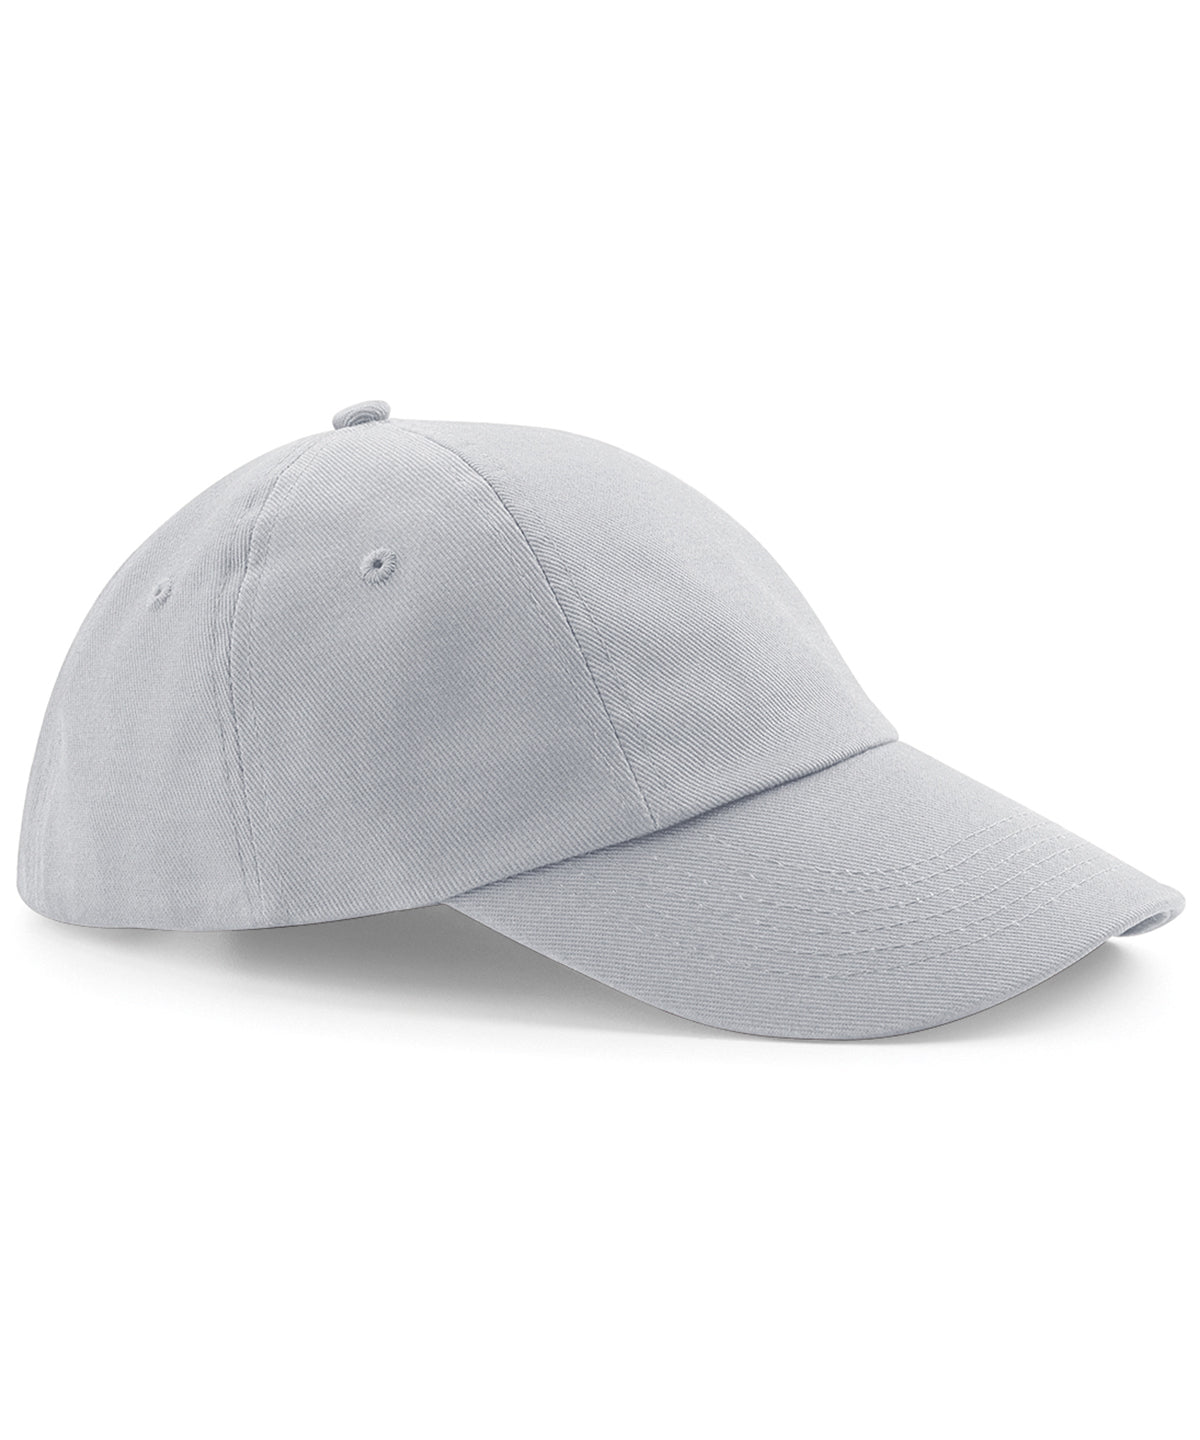 Personalised Caps - Light Grey Beechfield Low-profile heavy cotton drill cap